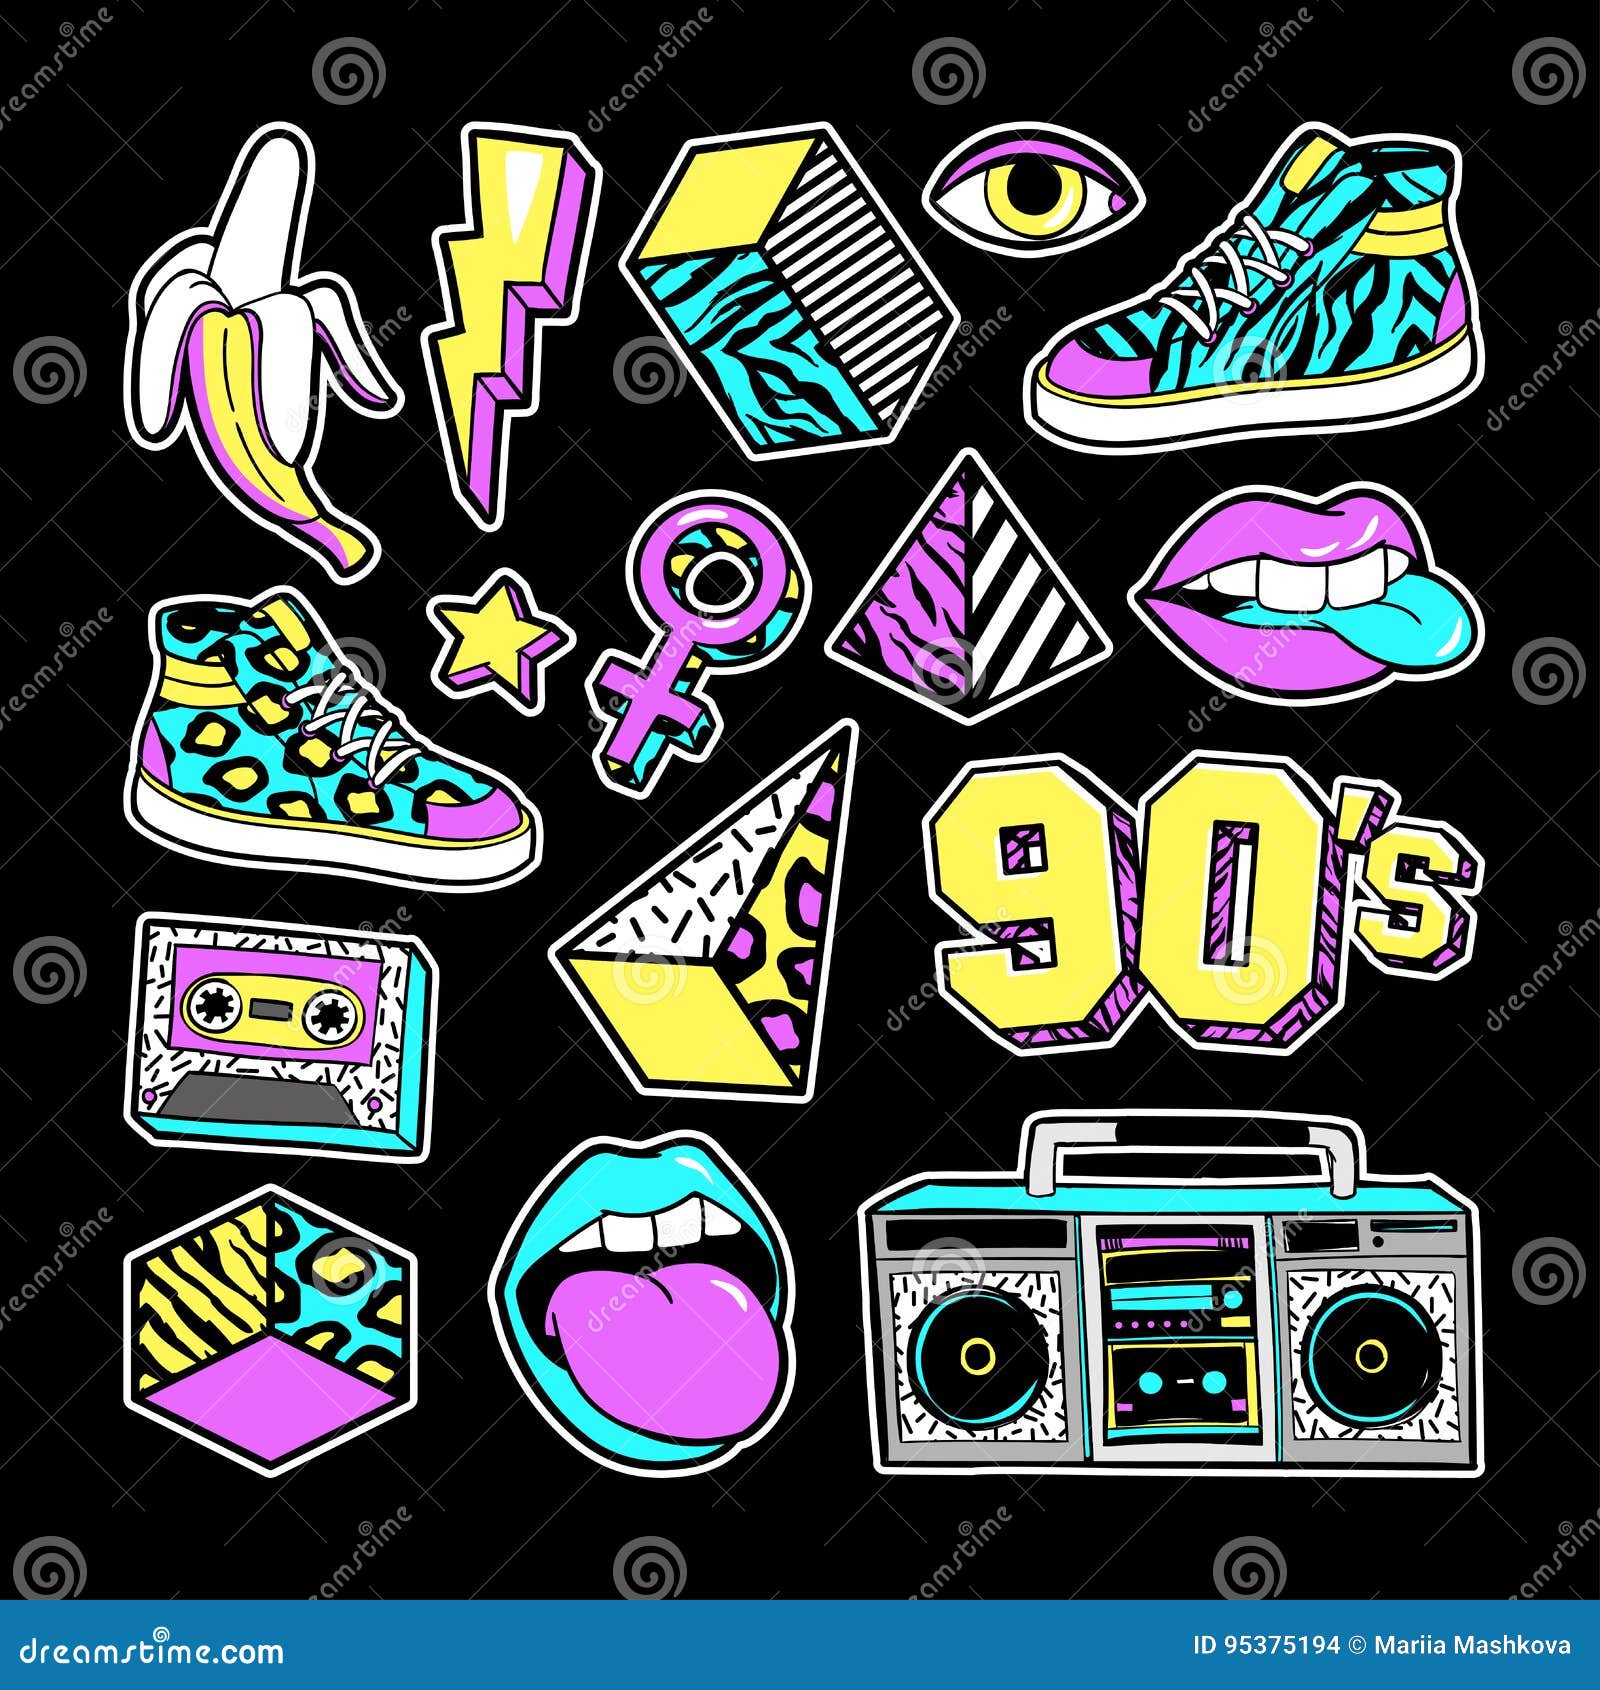 fashion patches in in 80s-90s memphis style.